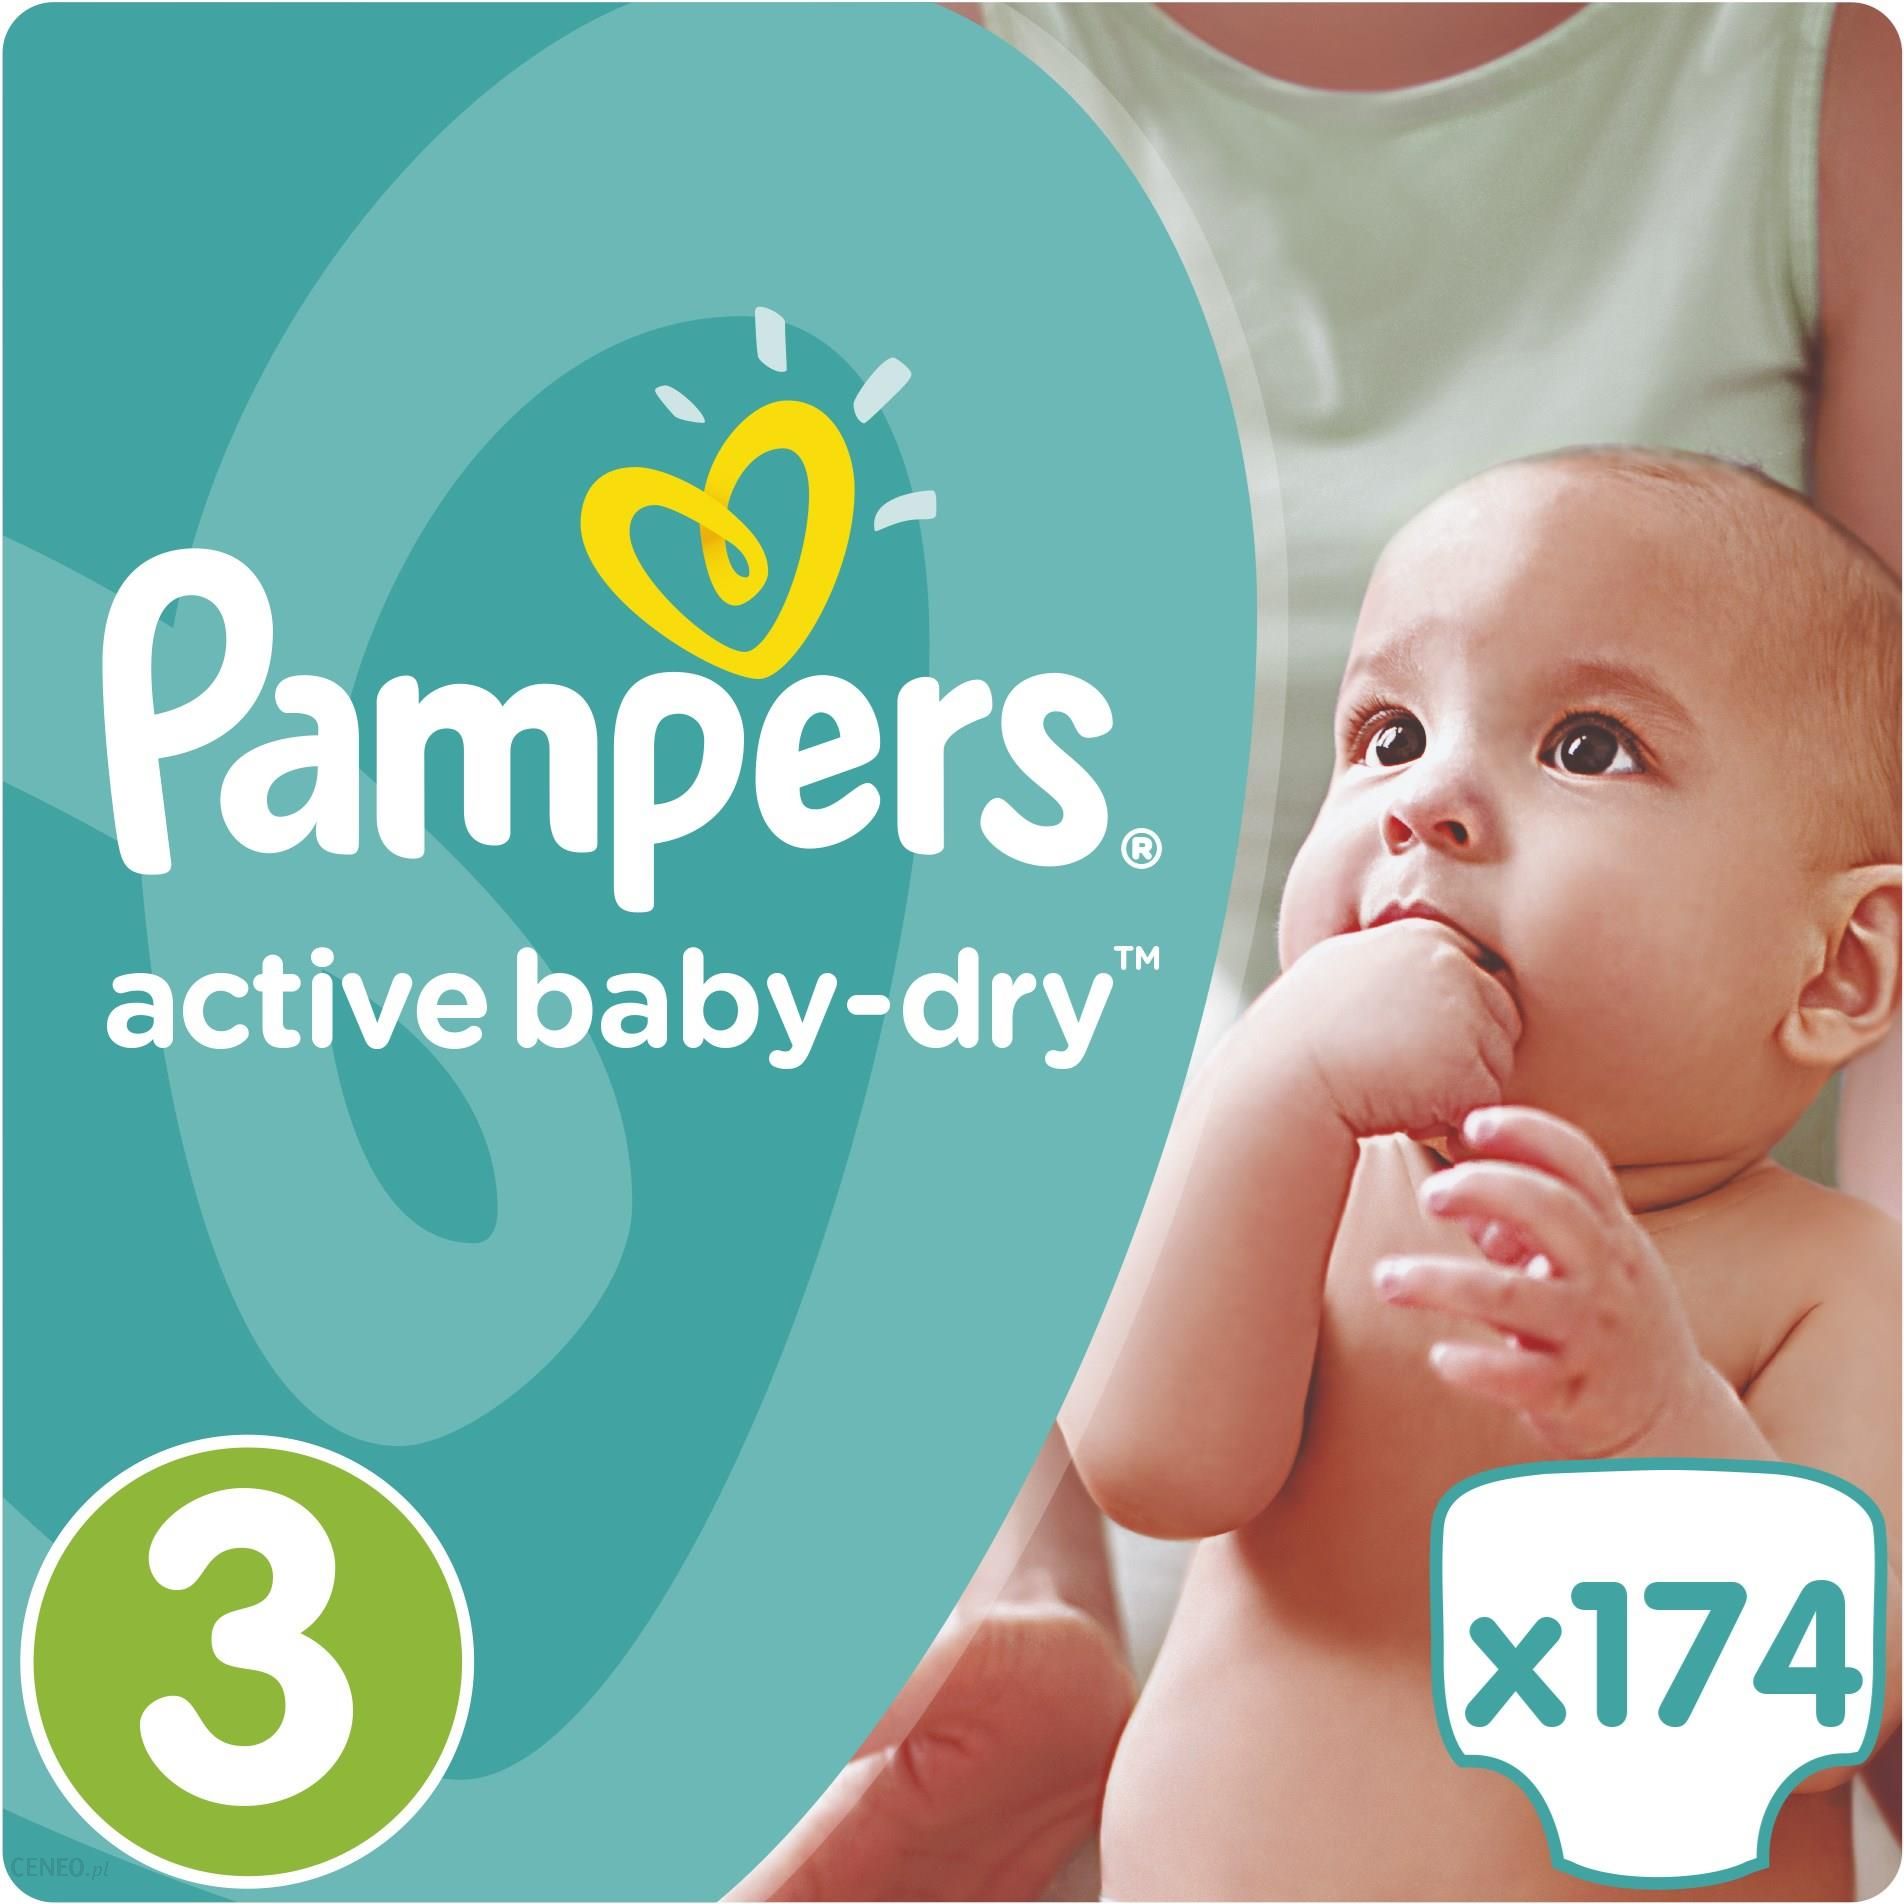 pampers active fit 7